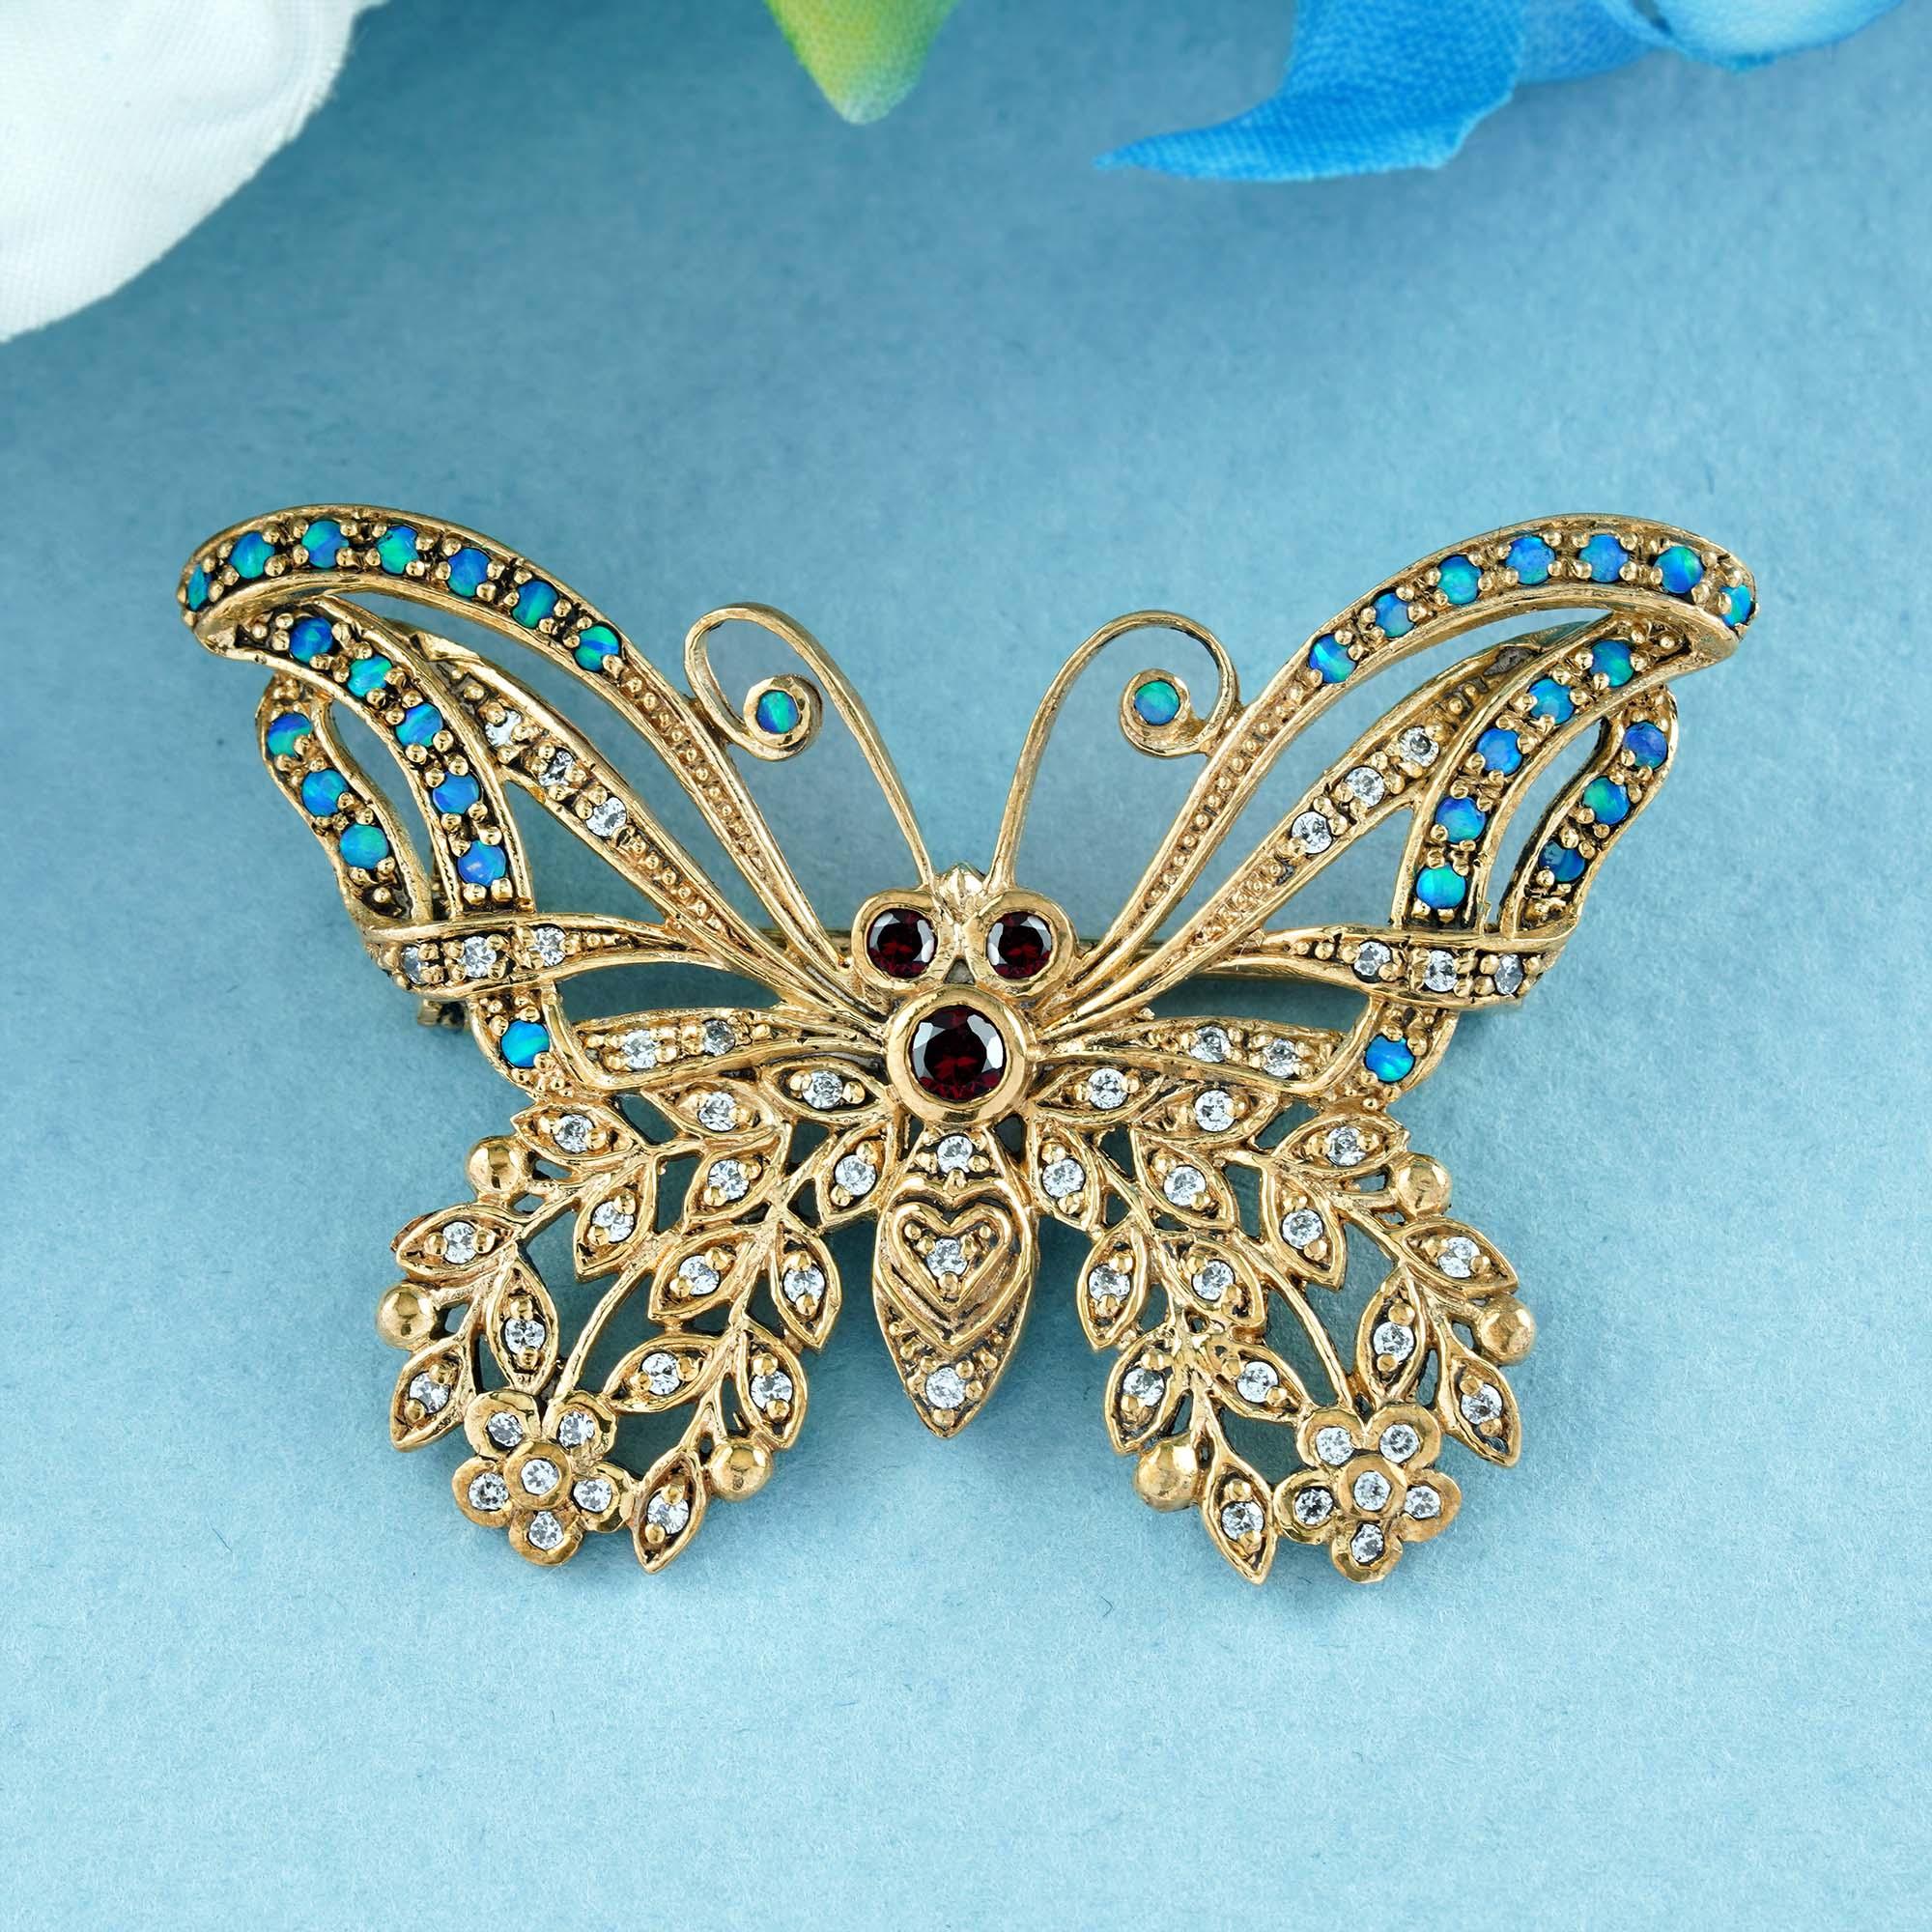 This stunning gold butterfly brooch in vintage style highlights an open-winged butterfly featuring red round garnets for the head and eyes to catch the attention, green round opals for the antenna, and embellishments of both on the inner and outer